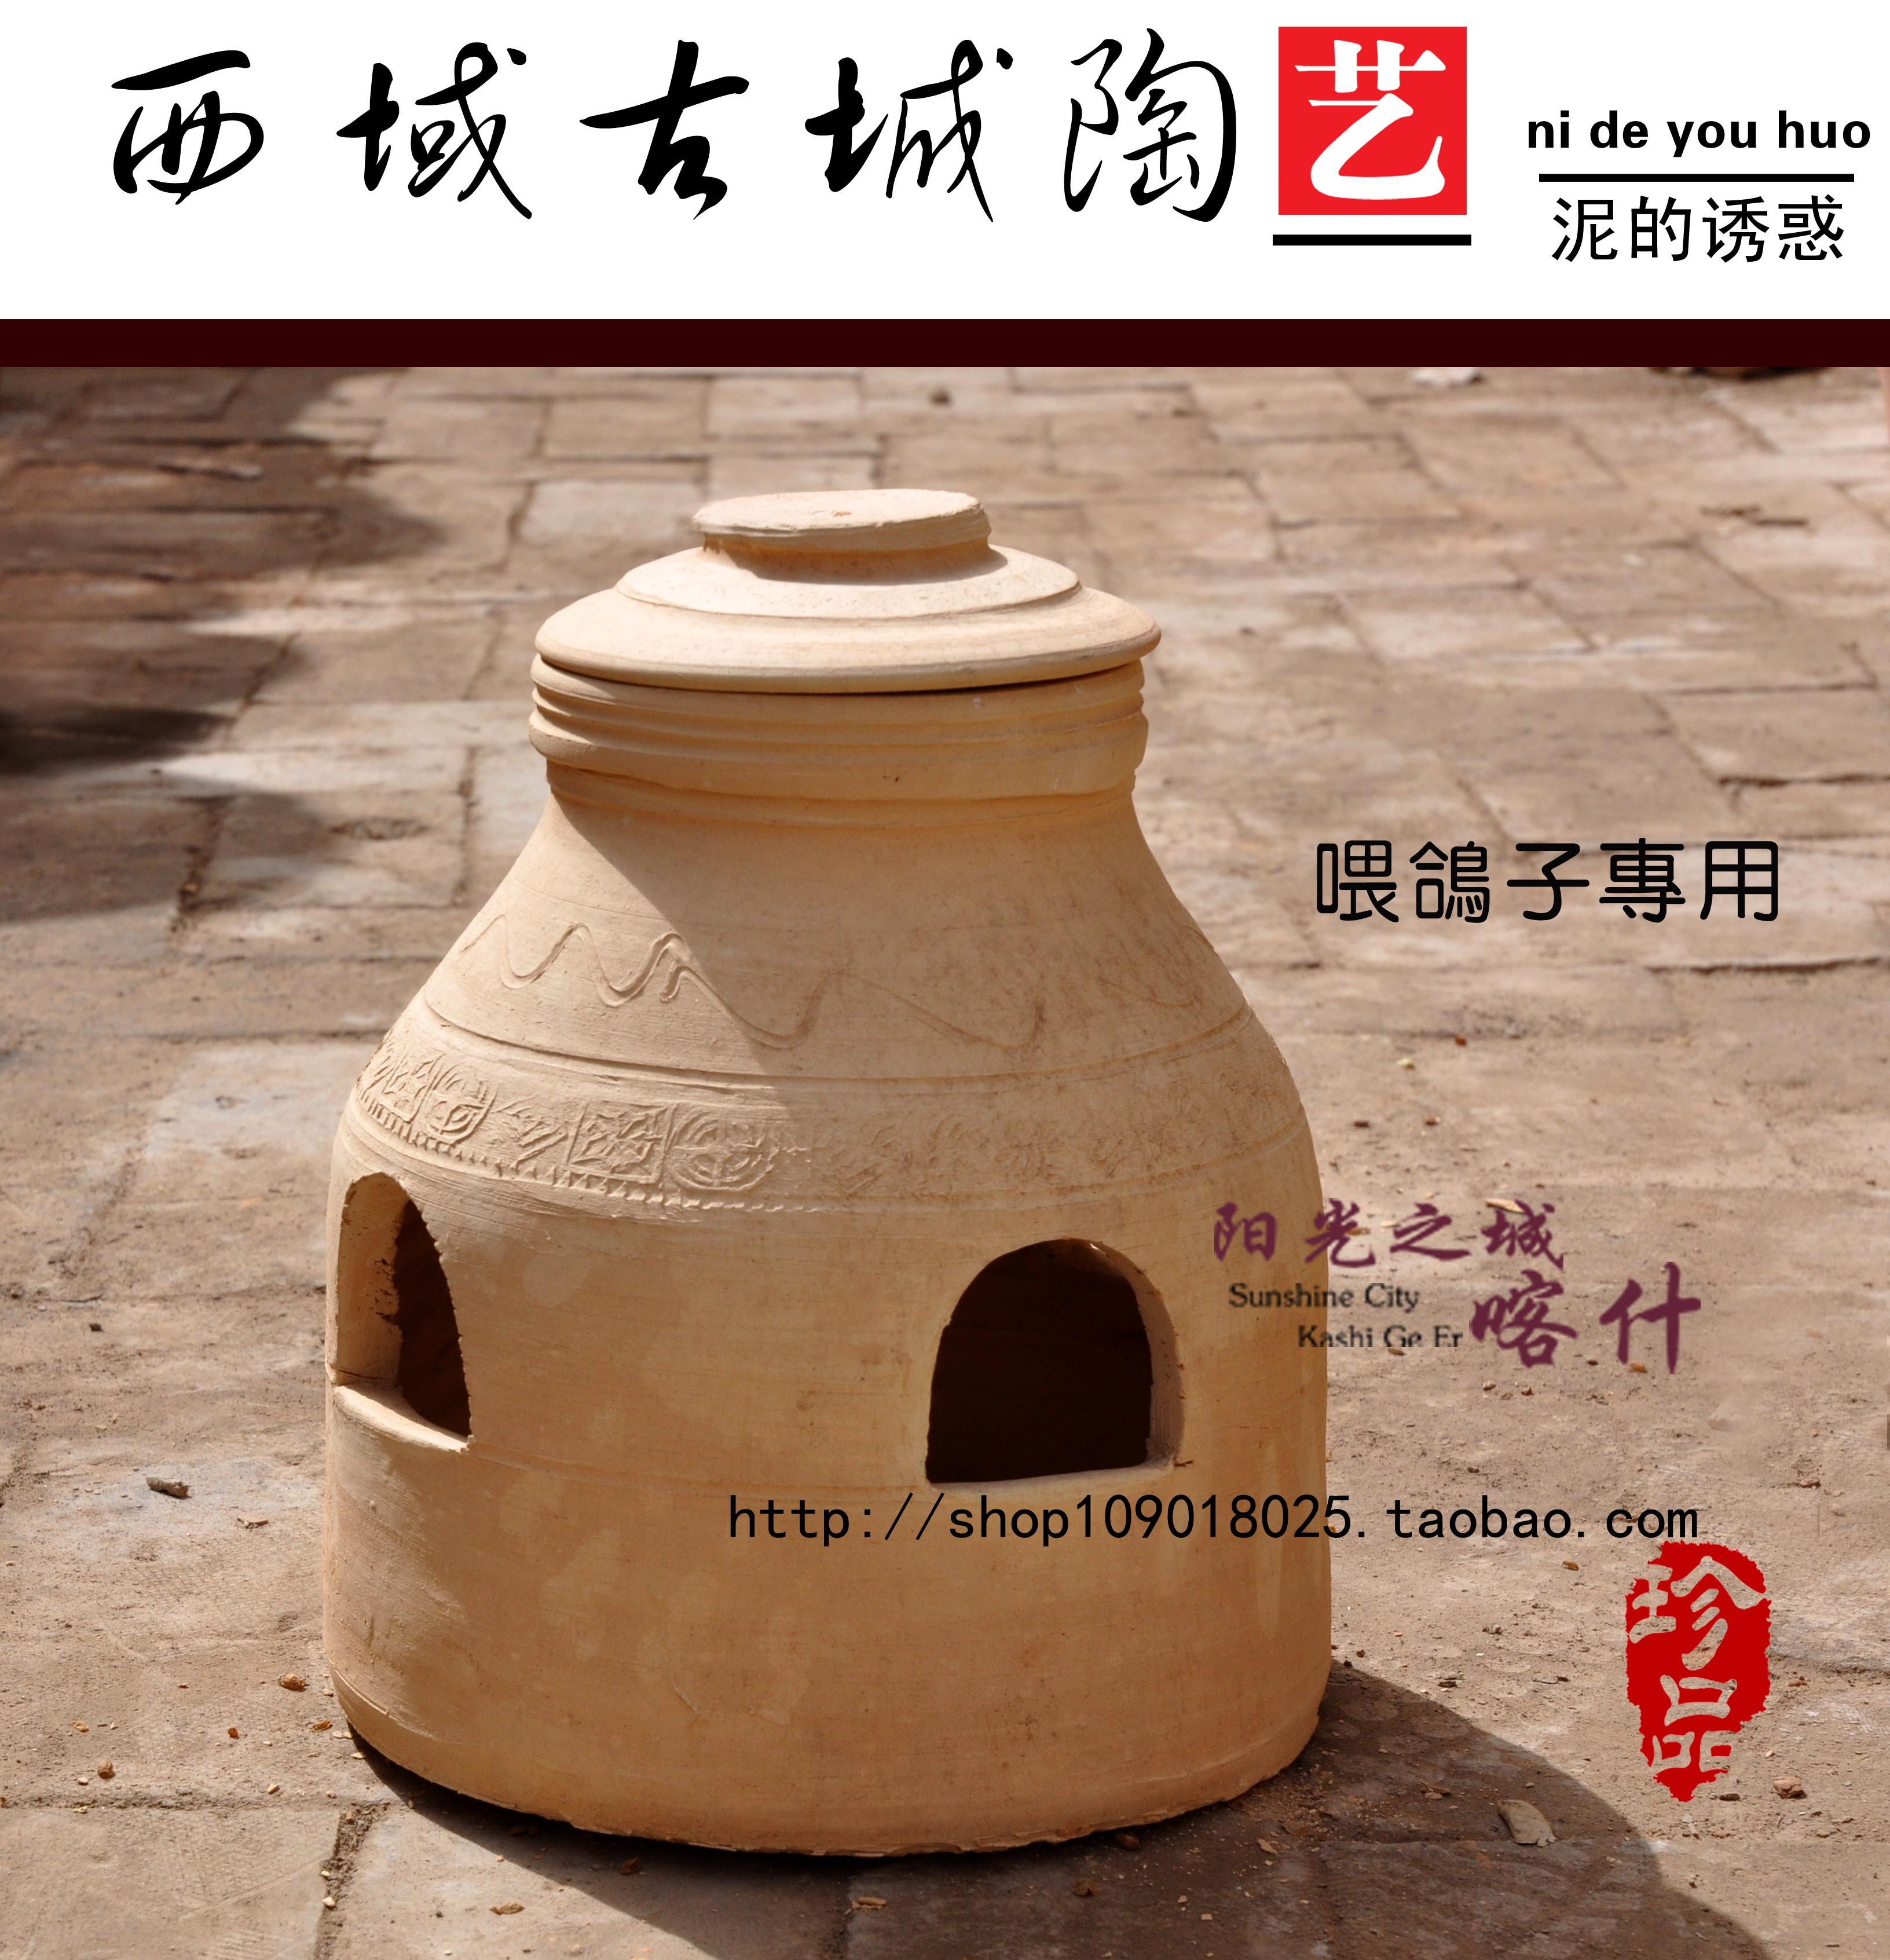 Xinjiang Kashgar Ethnic Pure Craft Earth Pottery Products Feeding Birds Pigeon Pitcher Cage Artificial Earth Pottery Bird Nest